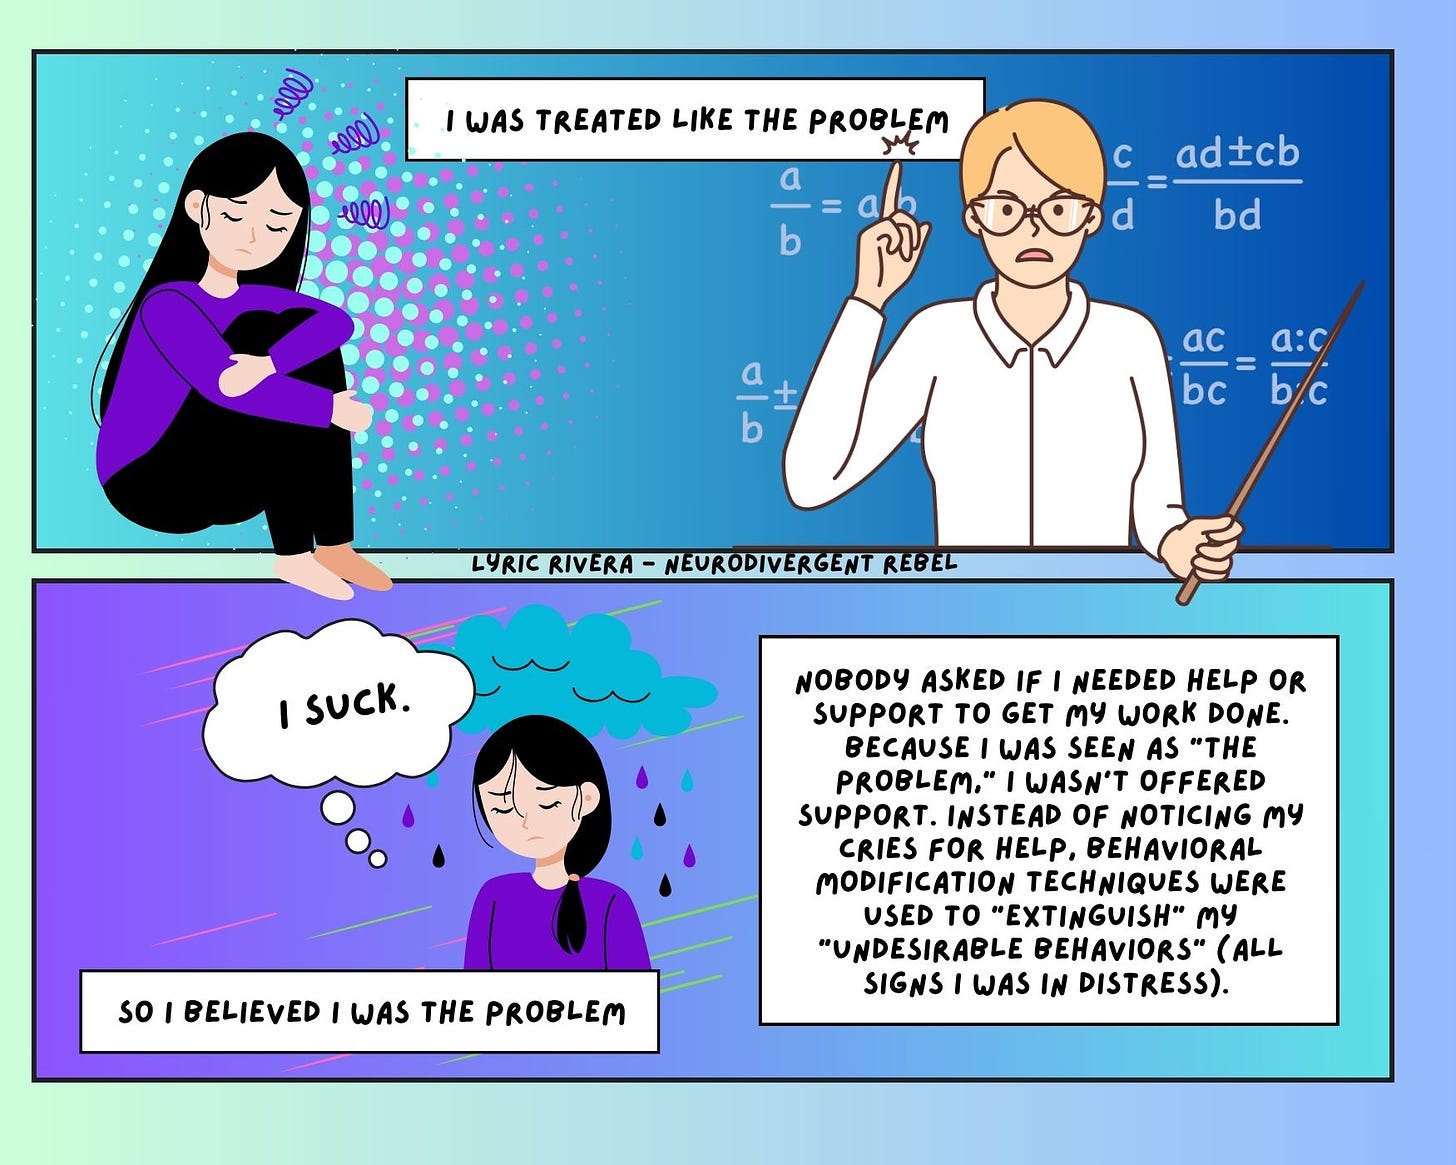 2 panel comic: first one young person with long black hair sitting in a curled up pose, frustrated and sad as a teacher scolds them. Second panel the same person has a rain cloud above them and they are thinking “i suck”. The caption on the comic reads “I was treated like the problem so I believed I was the problem” and “Nobody asked if I needed help or support to get my work done. Because I was seen as "the problem," I wasn't offered support - instead of noticing my cries for help, behavioral modification techniques were used to "extinguish" my "undesirable behaviors" (all signs I was in distress).”